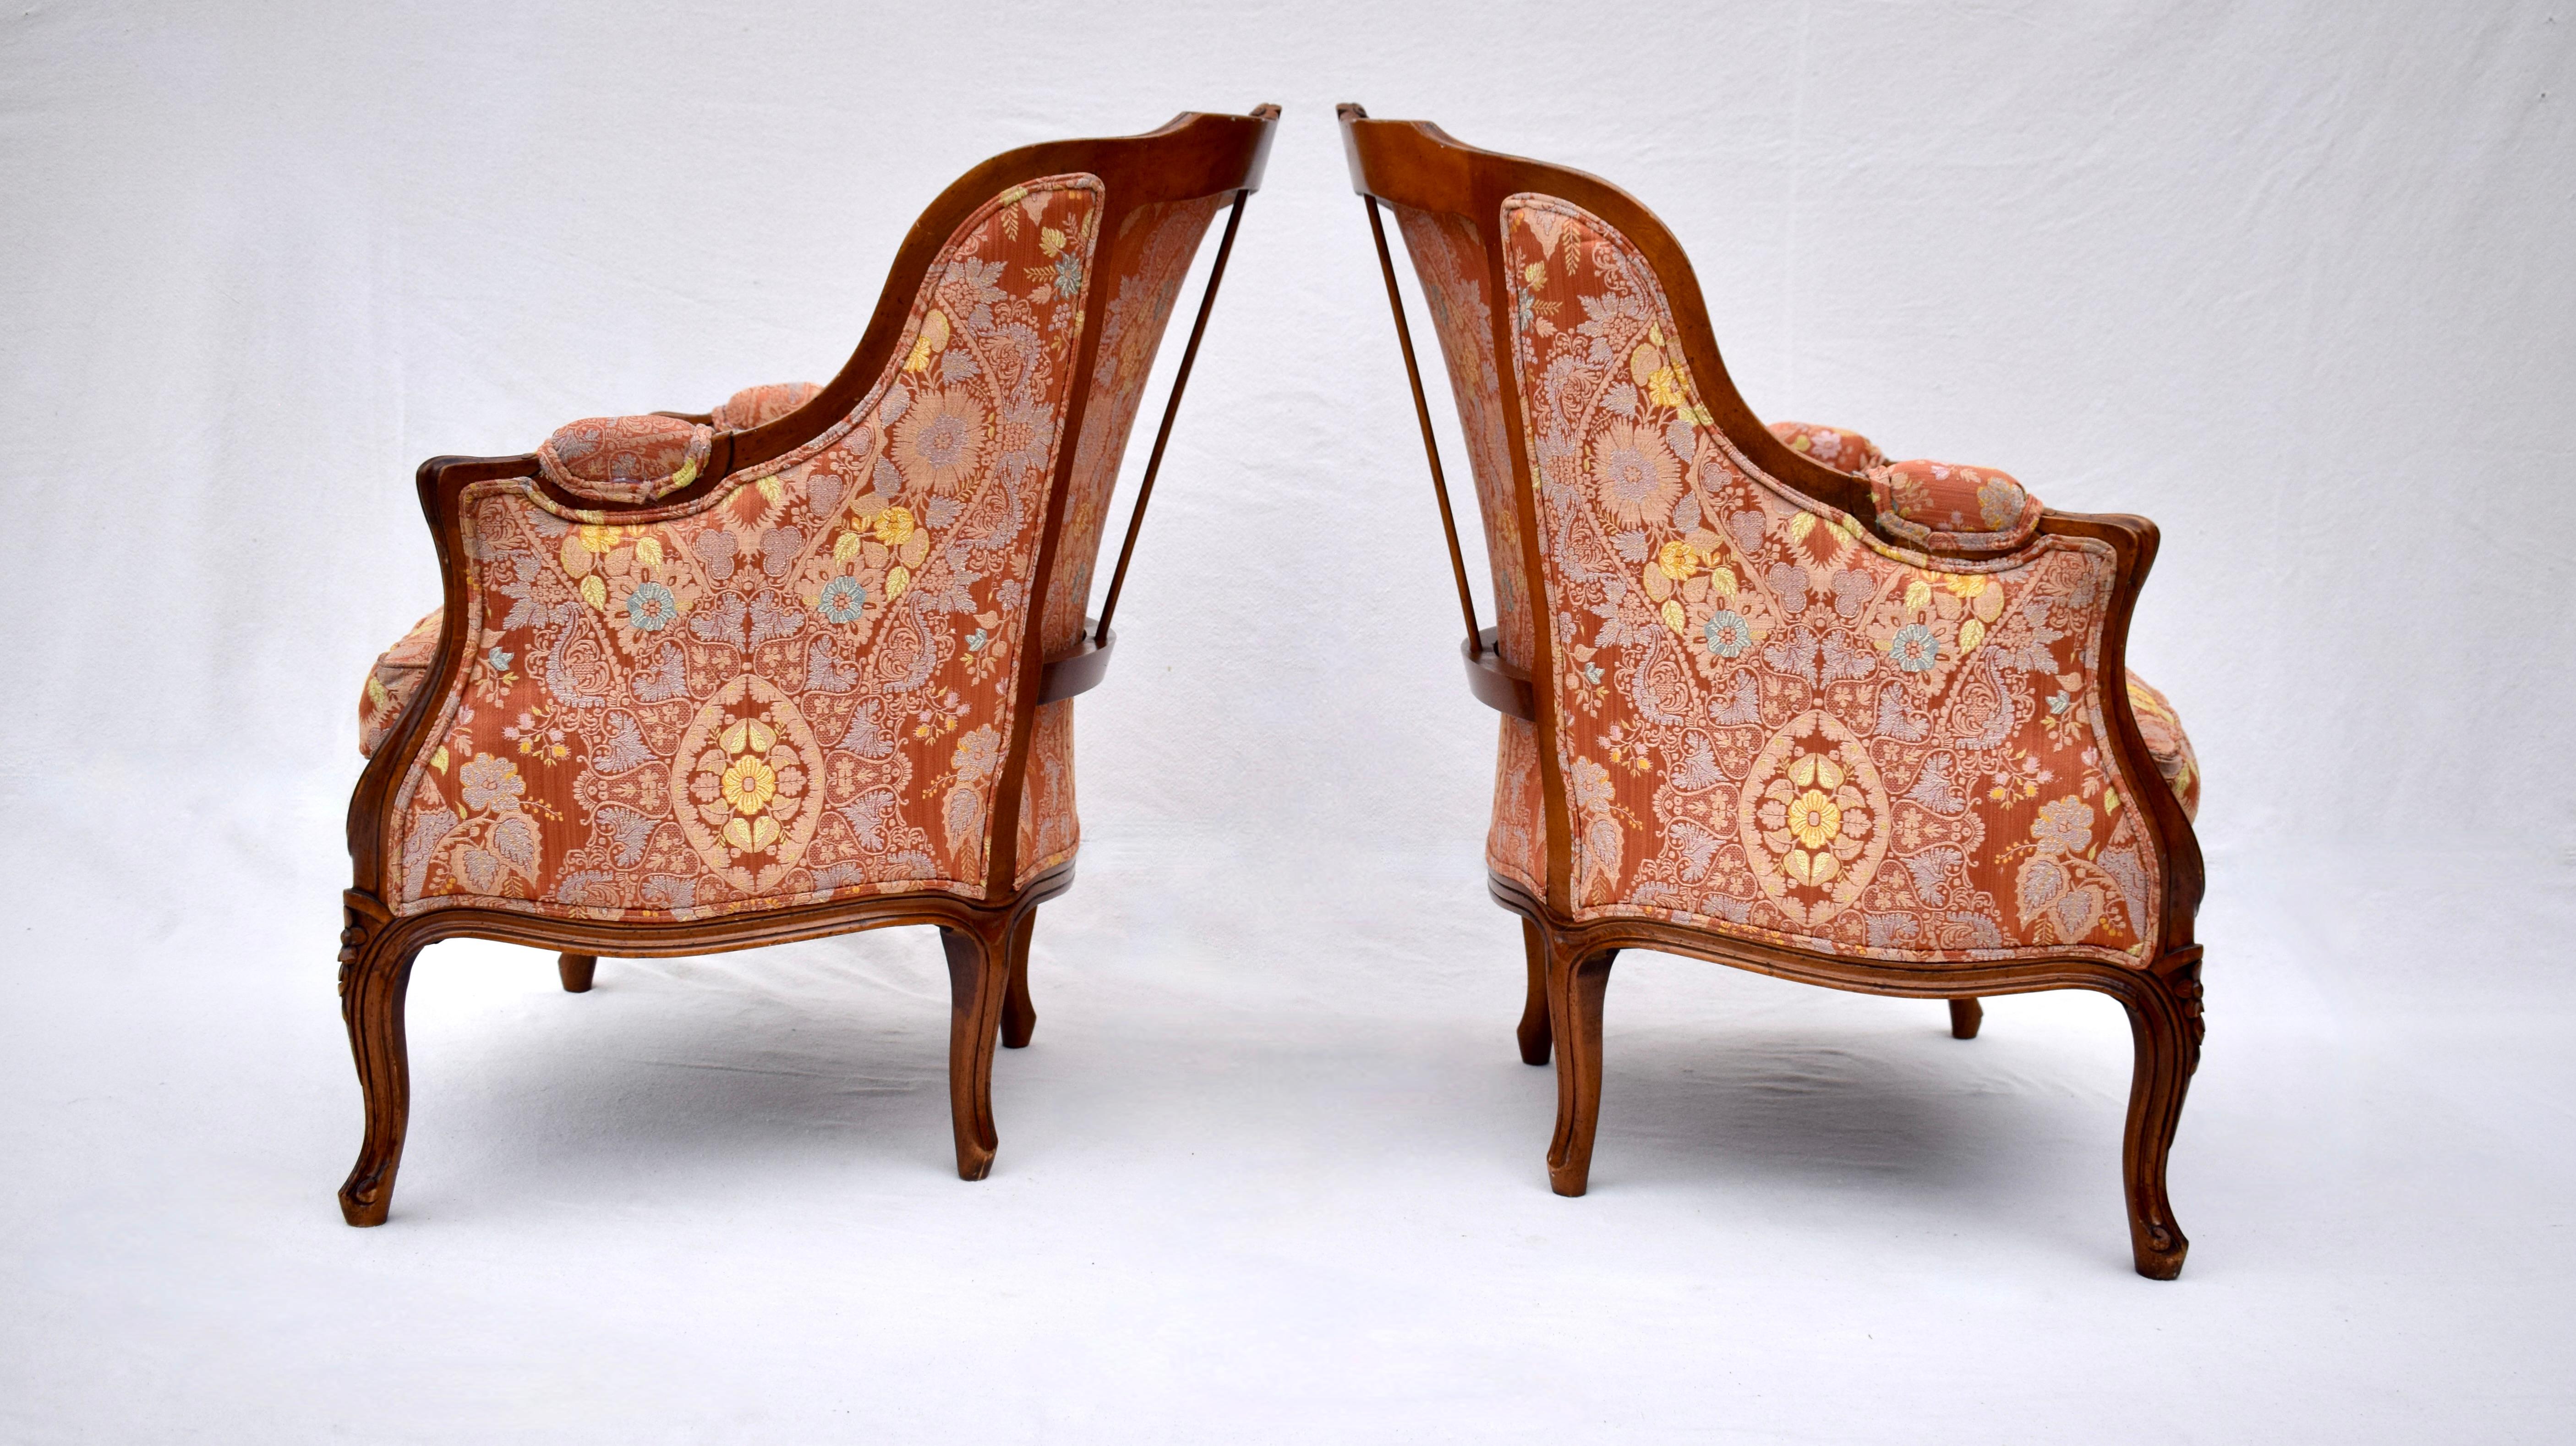 20th Century Early 20th C. Louis XV Style French Bergere Chairs, Pair